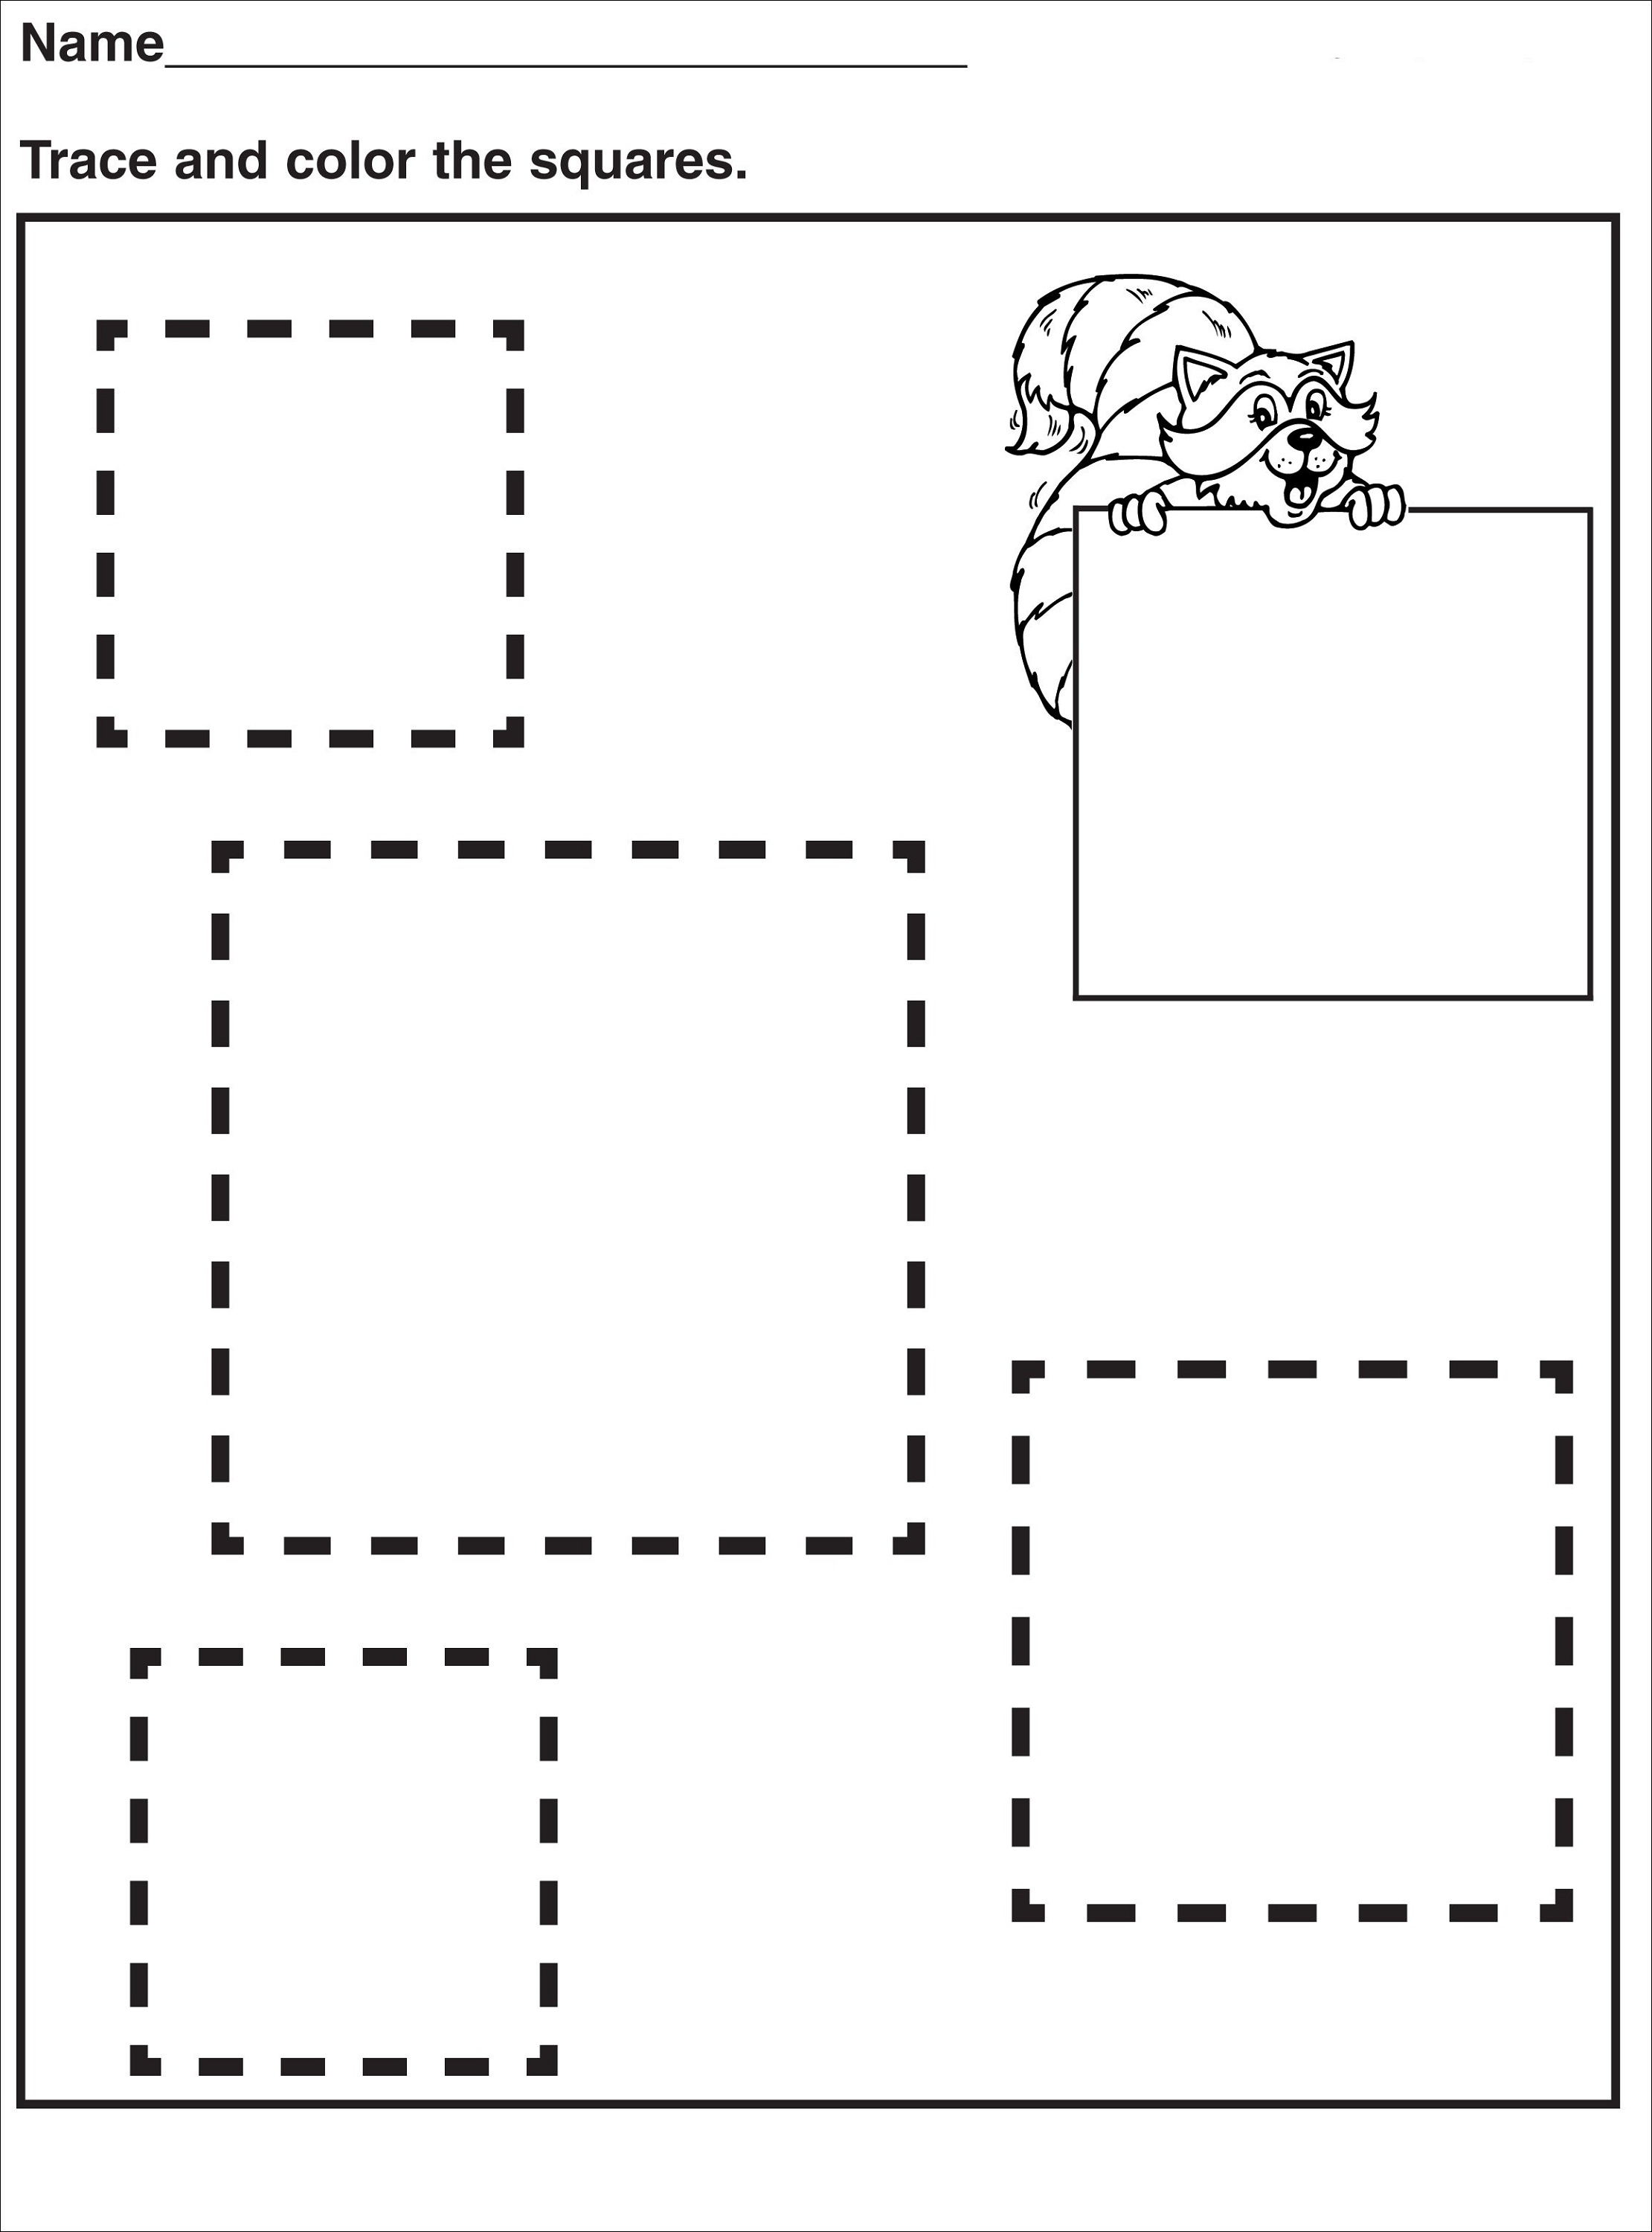 tracing-pages-for-preschool-activity-shelter